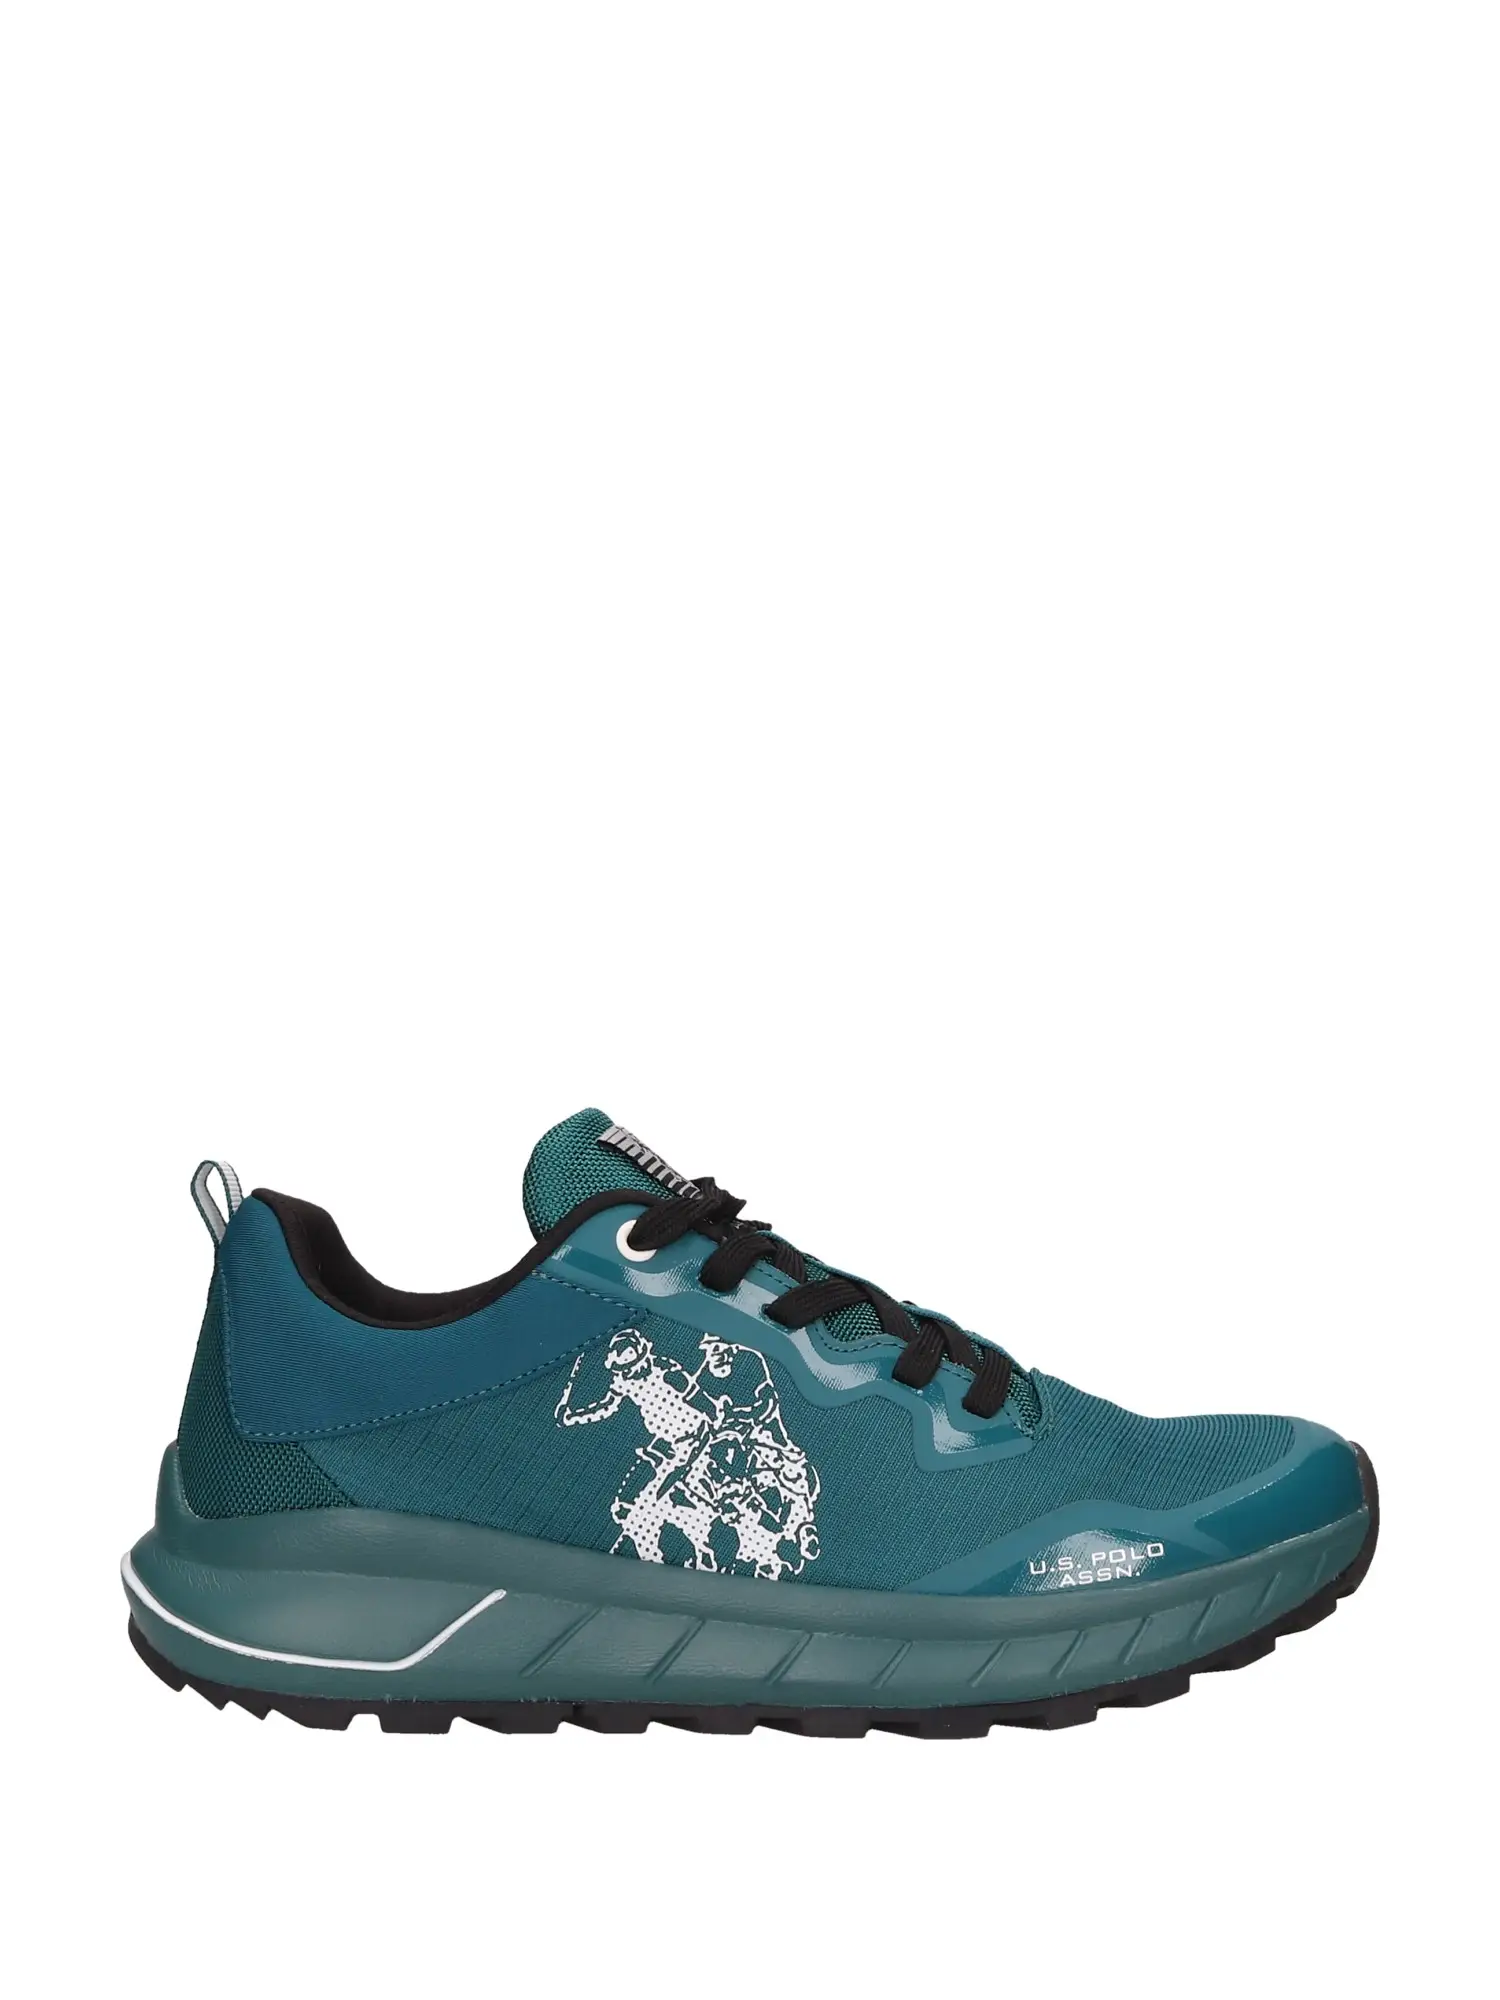 SNEAKERS DONNA - US POLO ASSN. - SETH005M - VERDE, 41